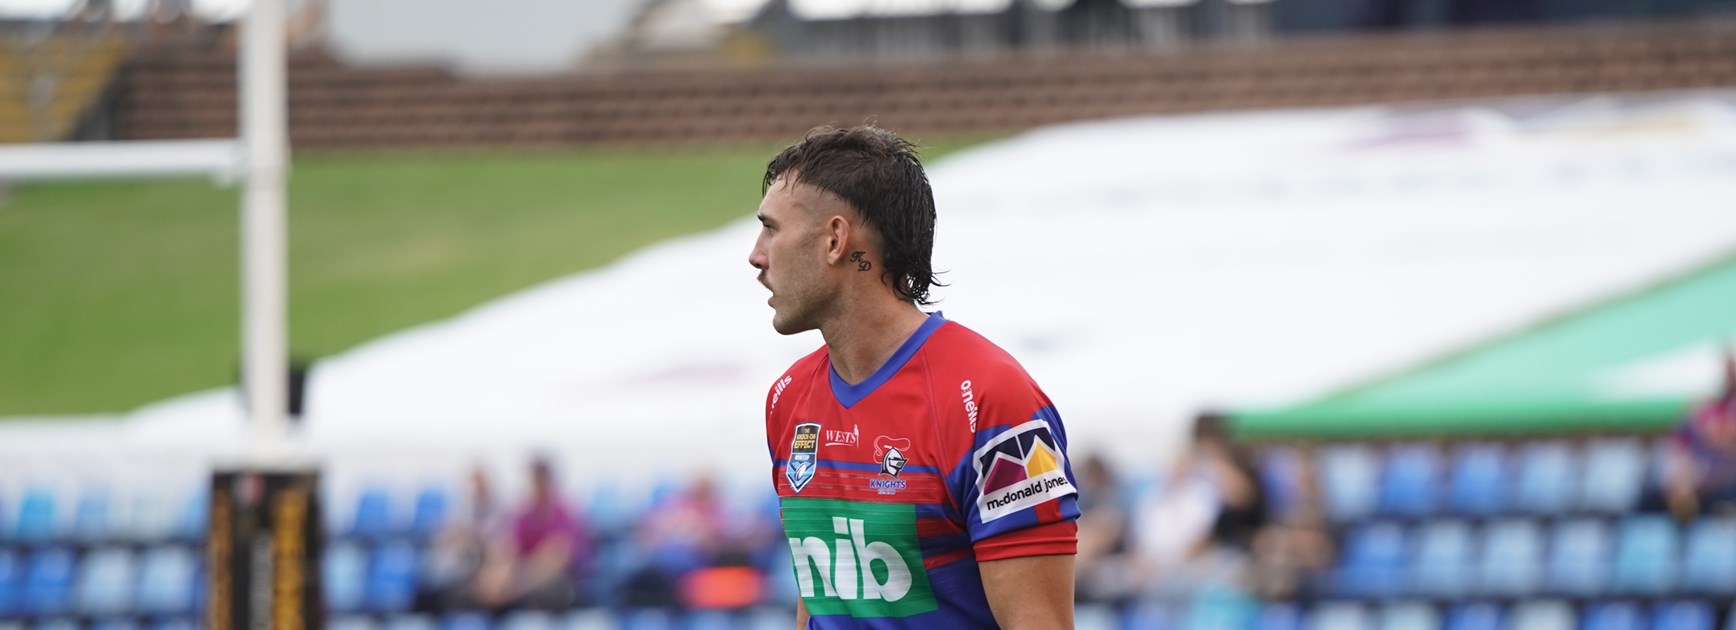 Knights fall to Mounties in NSW Cup